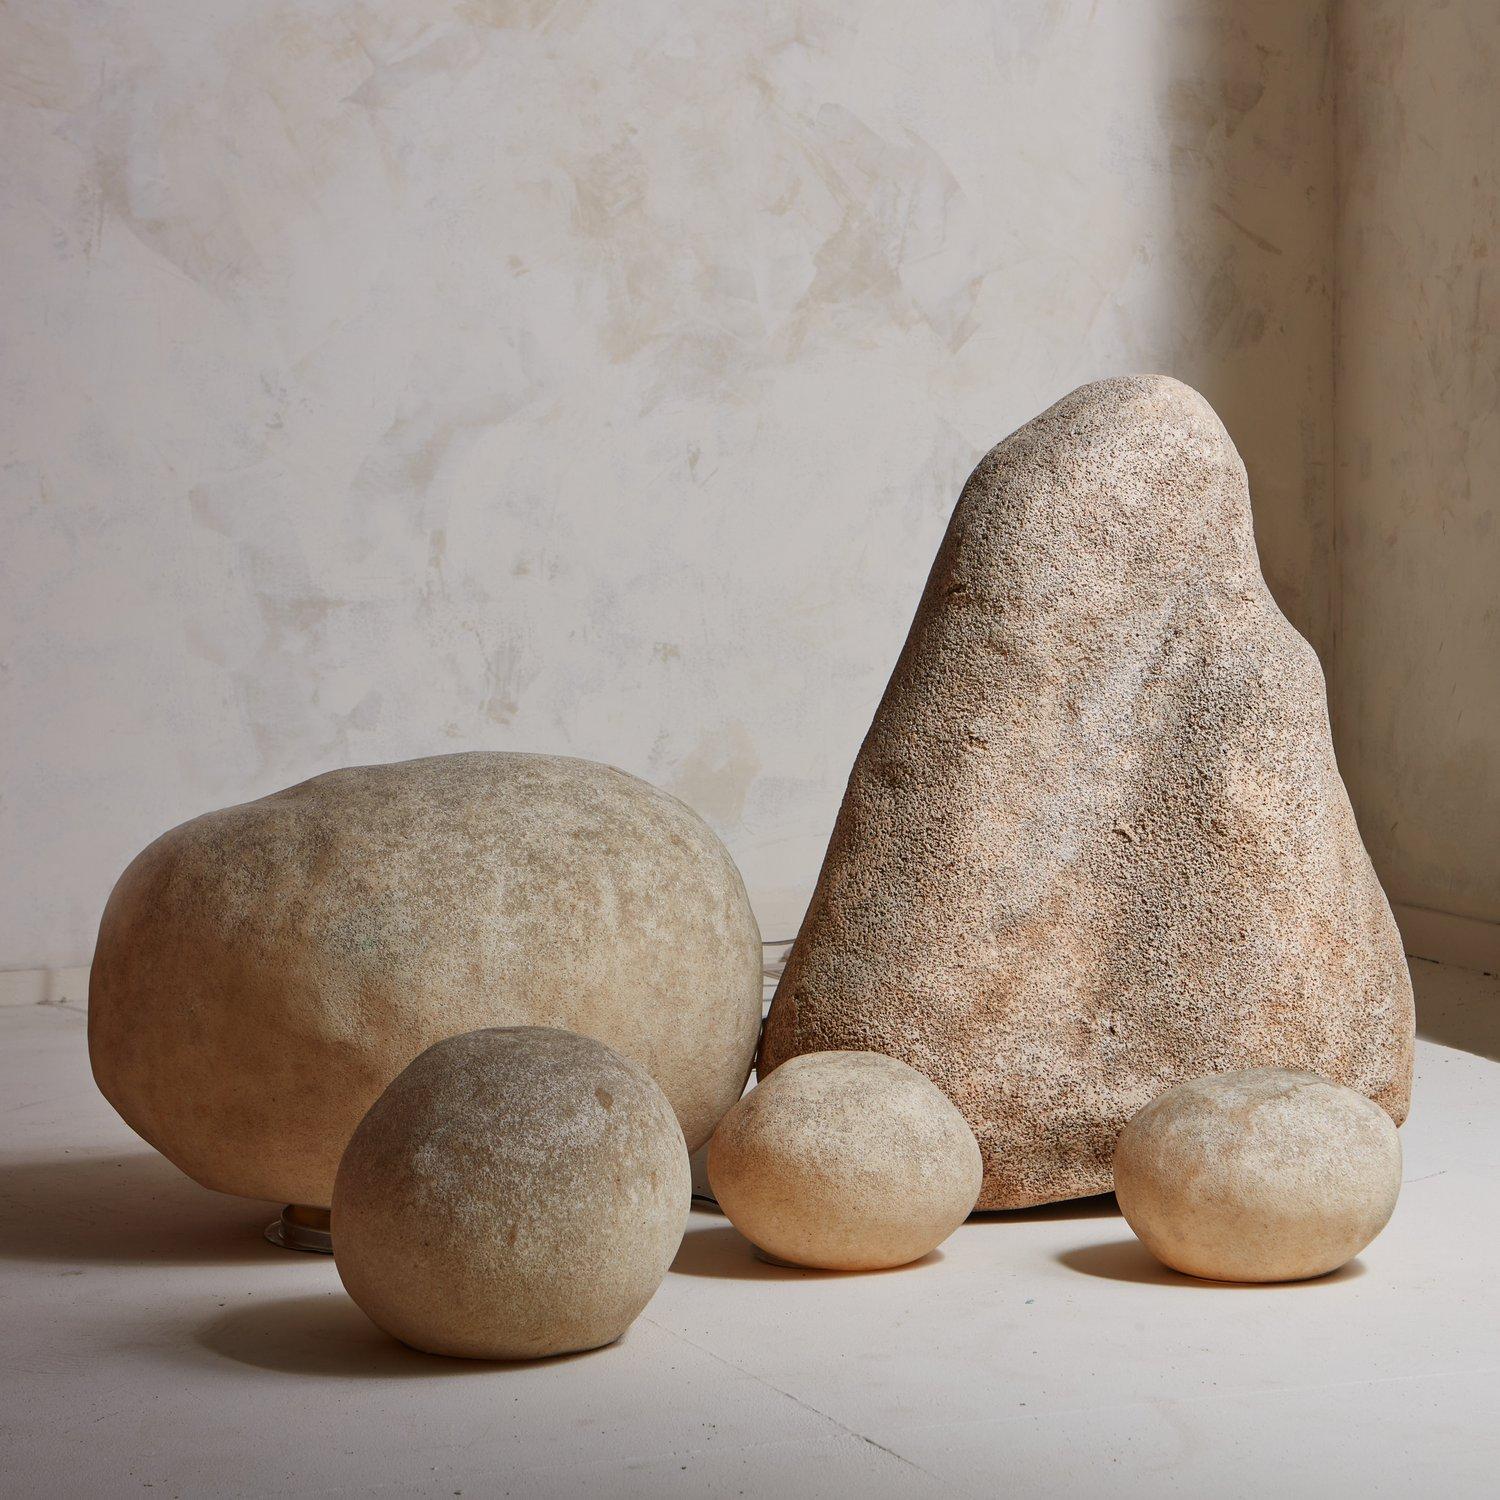 A set of 5 rock lamps designed by Andre Cazenave (1928-2003) in the late 1960s. These lamps were made from resin and marble powder and designed to emulate an oversized pebble. We love the textural finish and realistic detailing on these beauties.